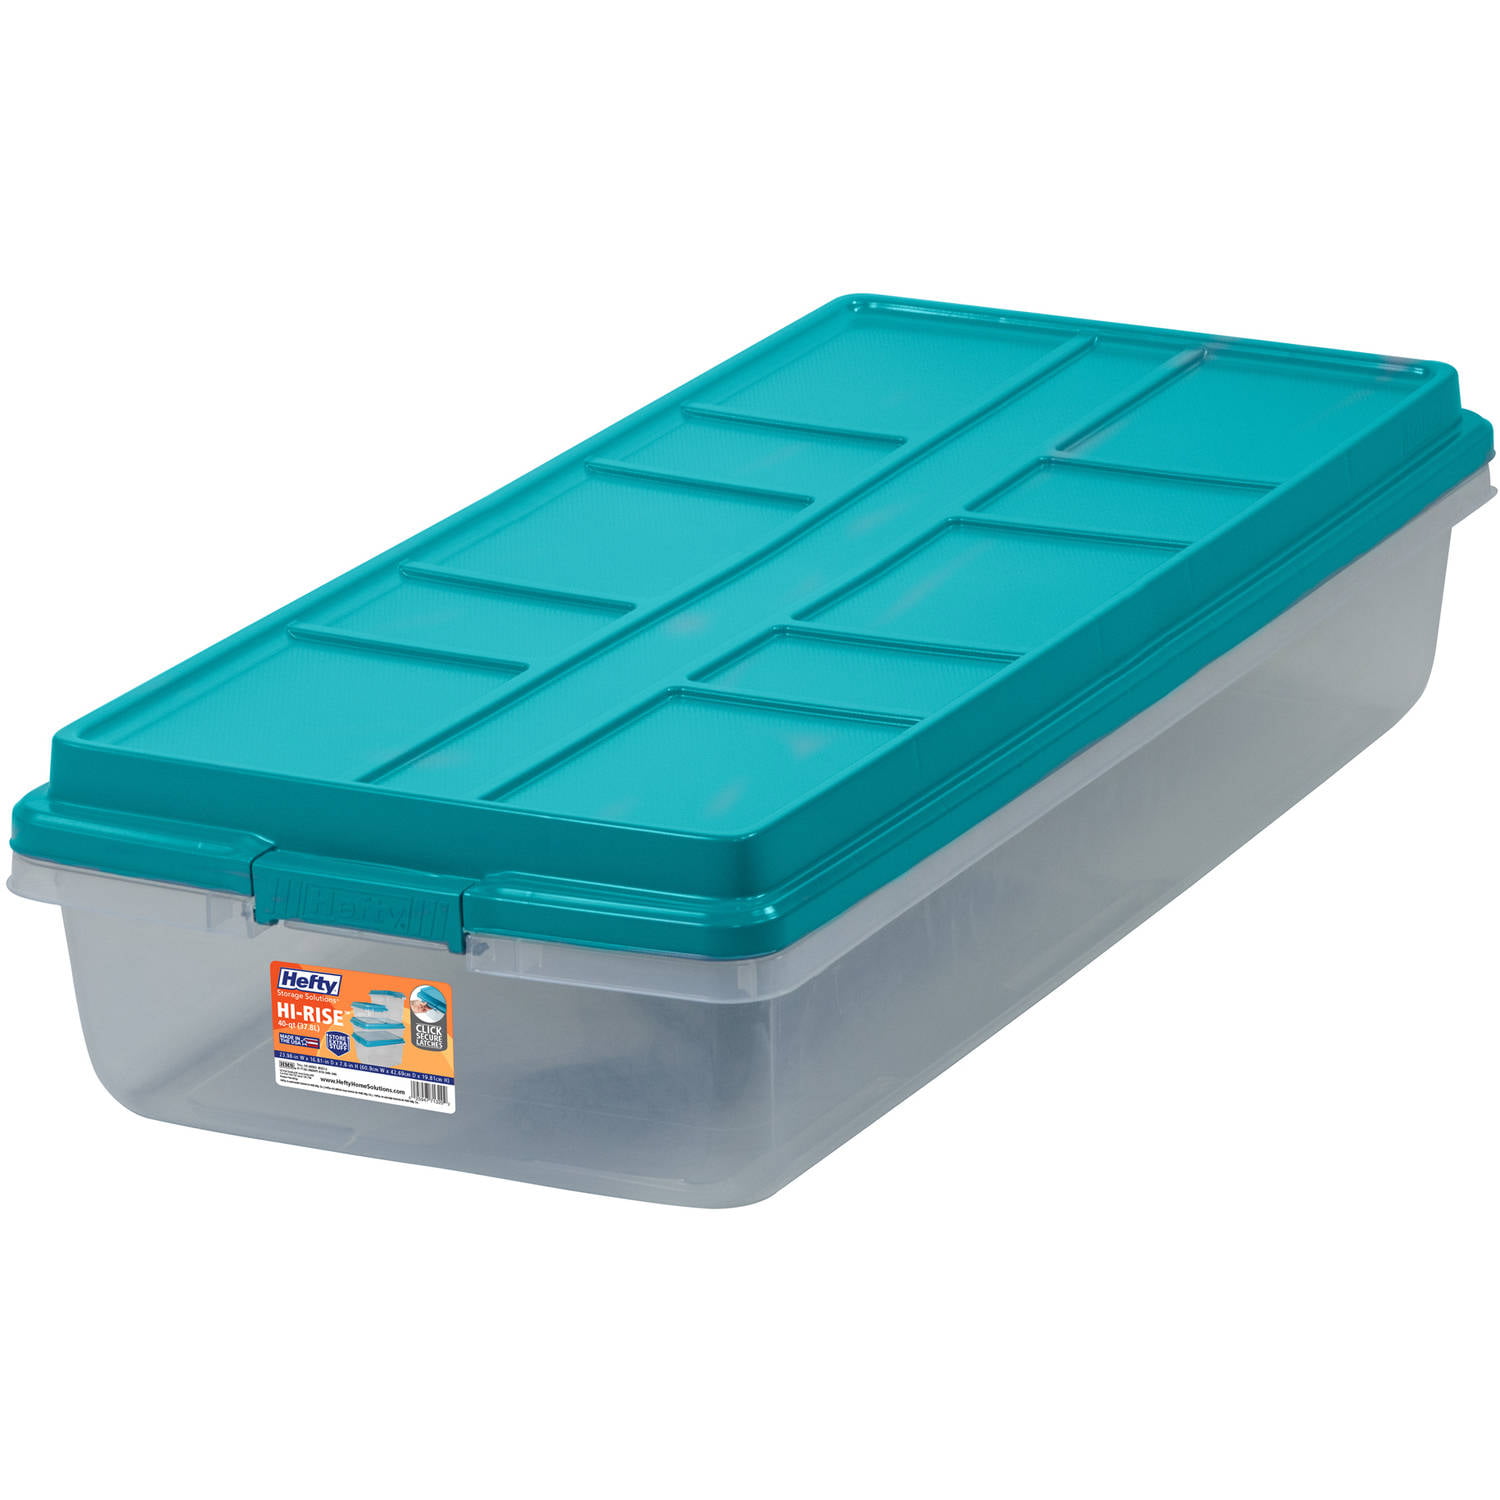 Underbed Storage Container 63Qt High Rise Clear Latch Box Teal Lid Handles Box 720389312012 | eBay